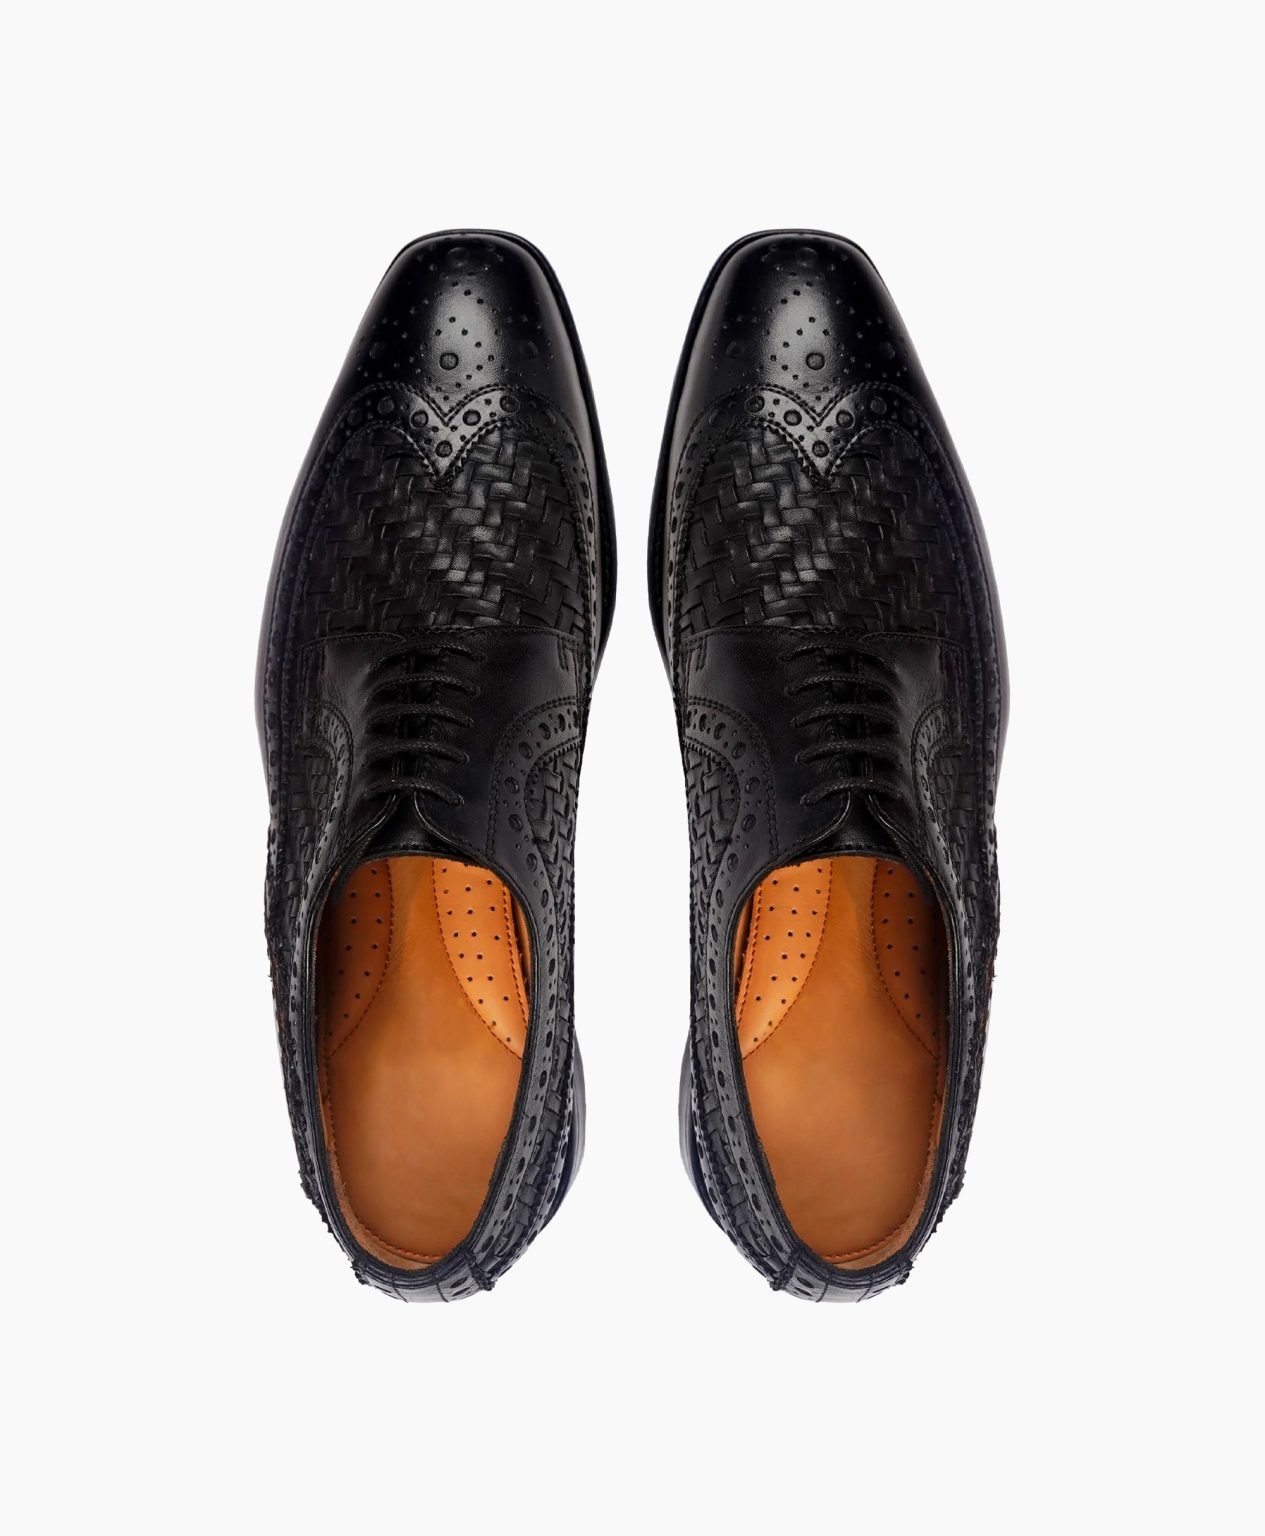 buxton-derby-black-woven-leather-shoes-image202